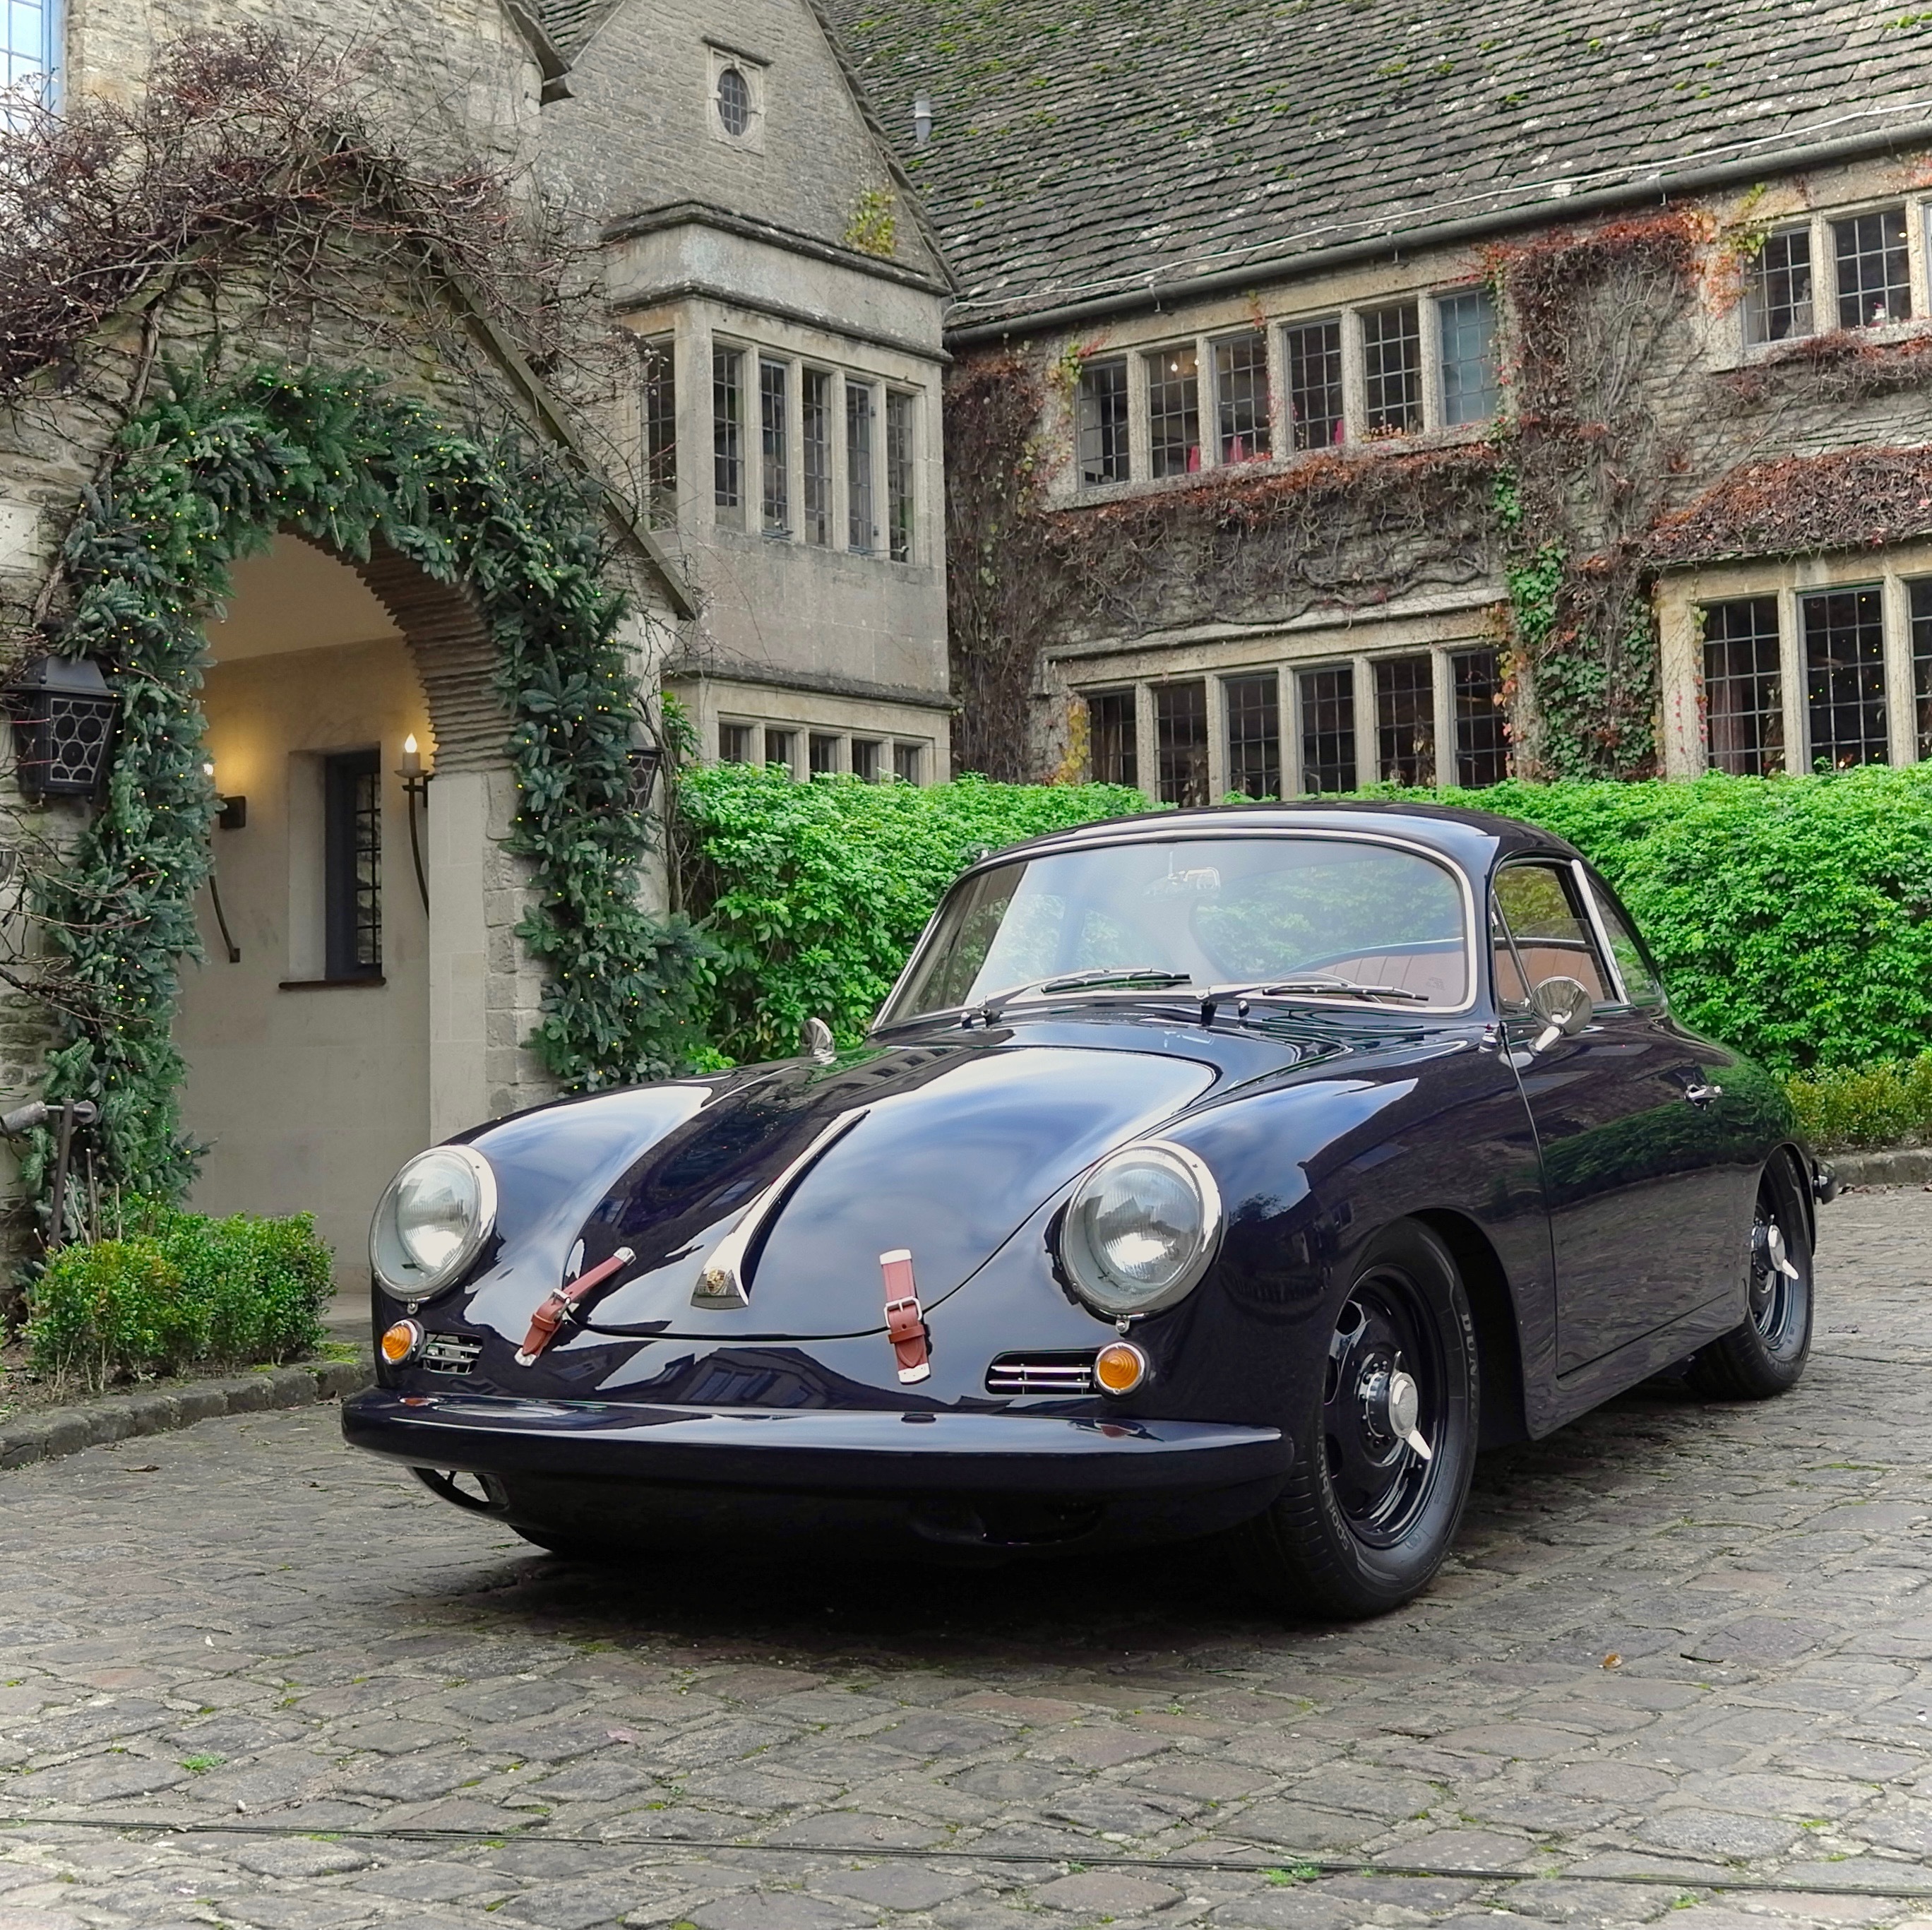 Dark blue Porsche 356 outside stone-built Cotswold country hotel